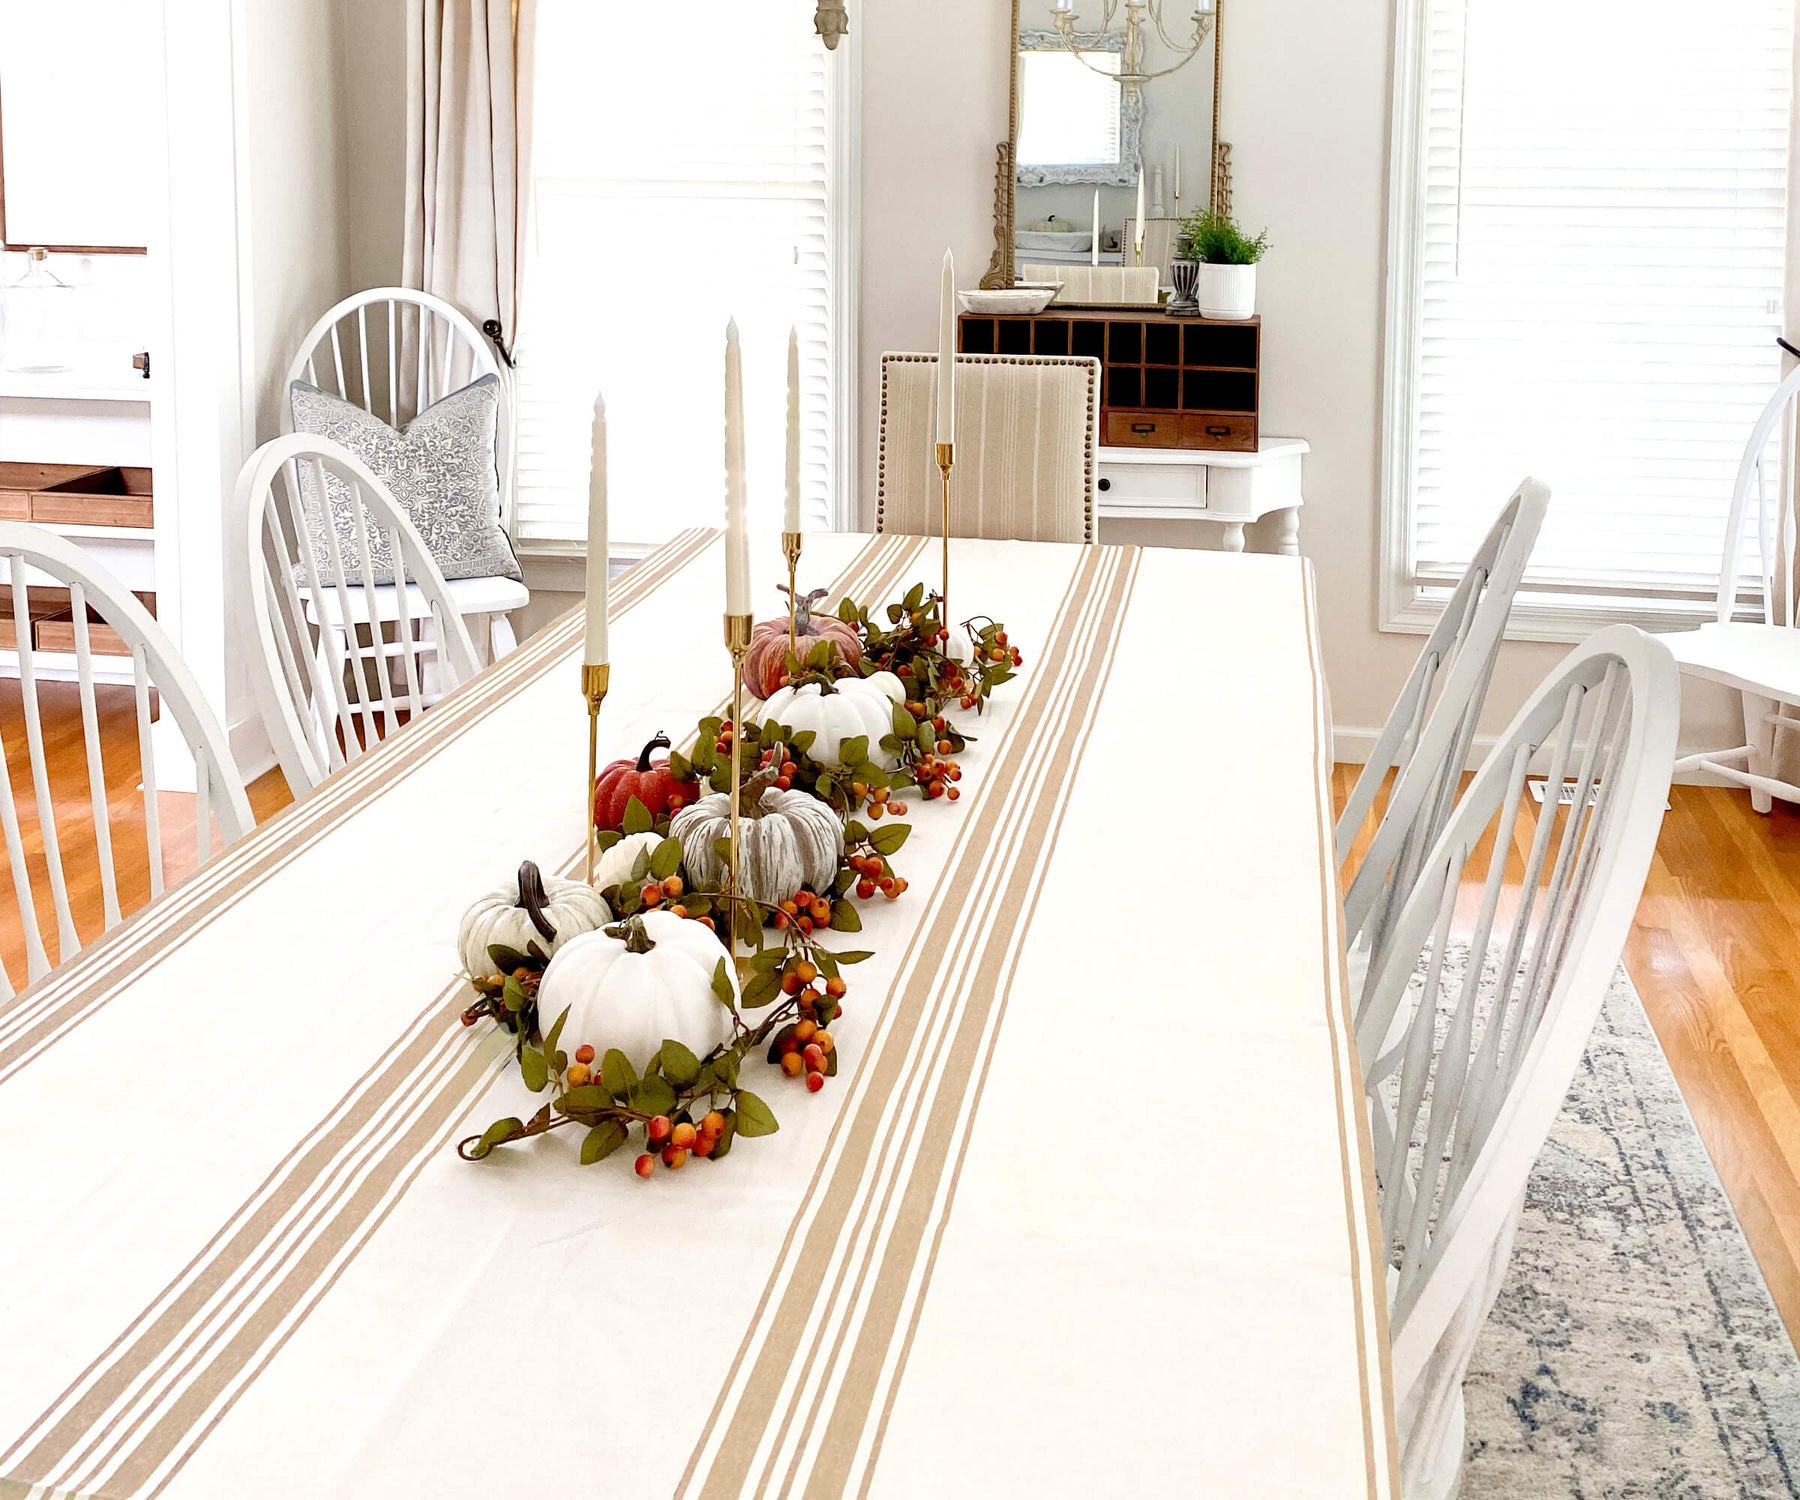 Farmhouse tablecloth on a dining table with white chairs